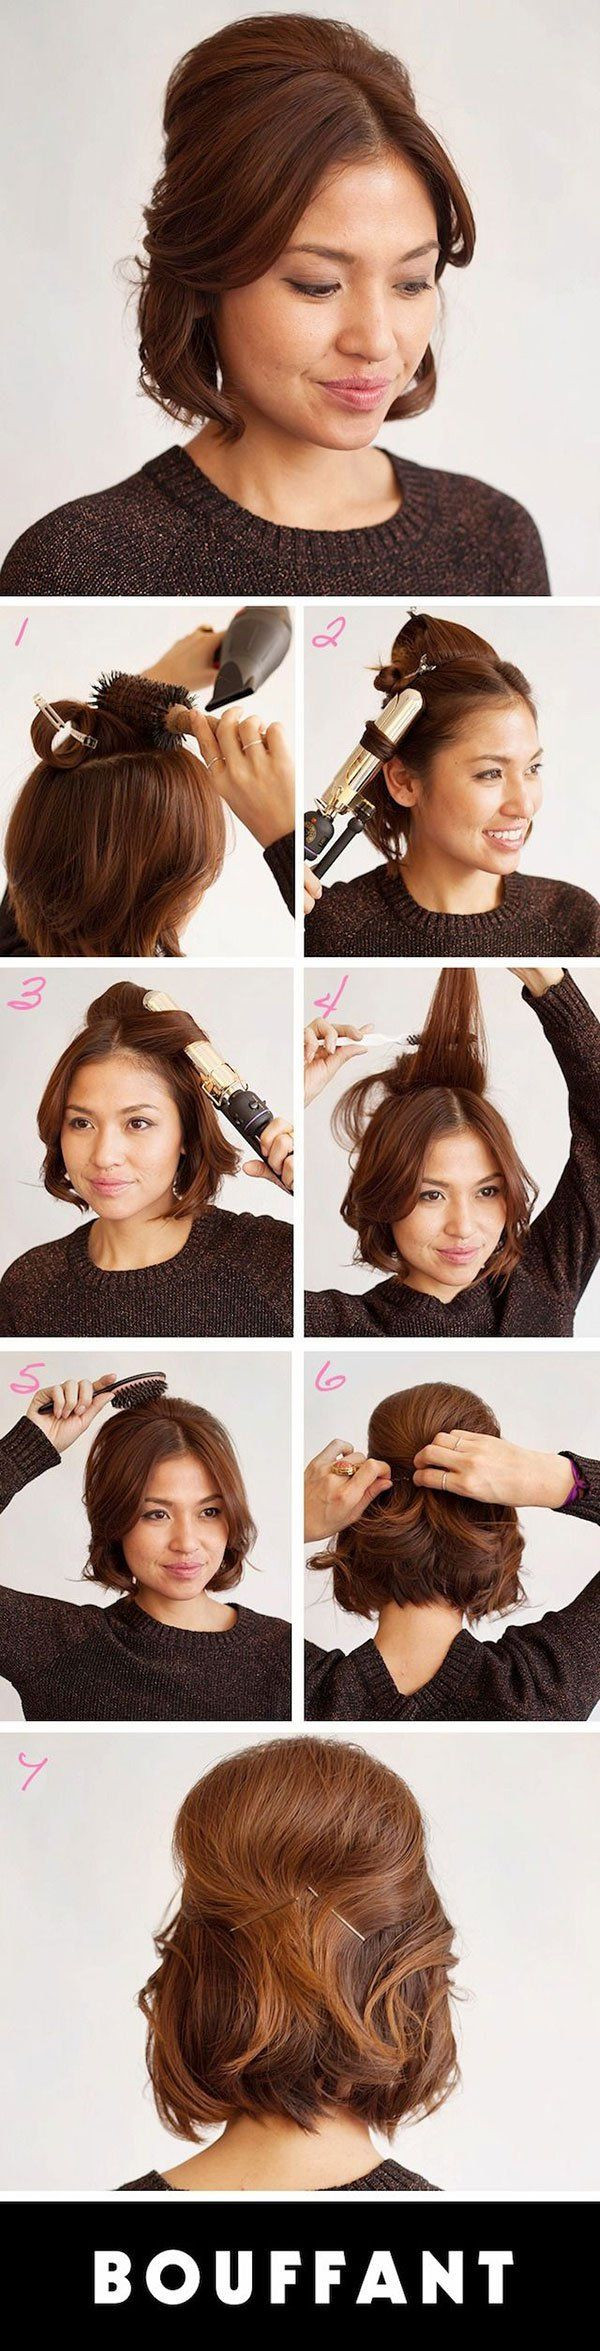 DIY Hairstyle For Short Hair
 Best 20 Short formal hairstyles ideas on Pinterest